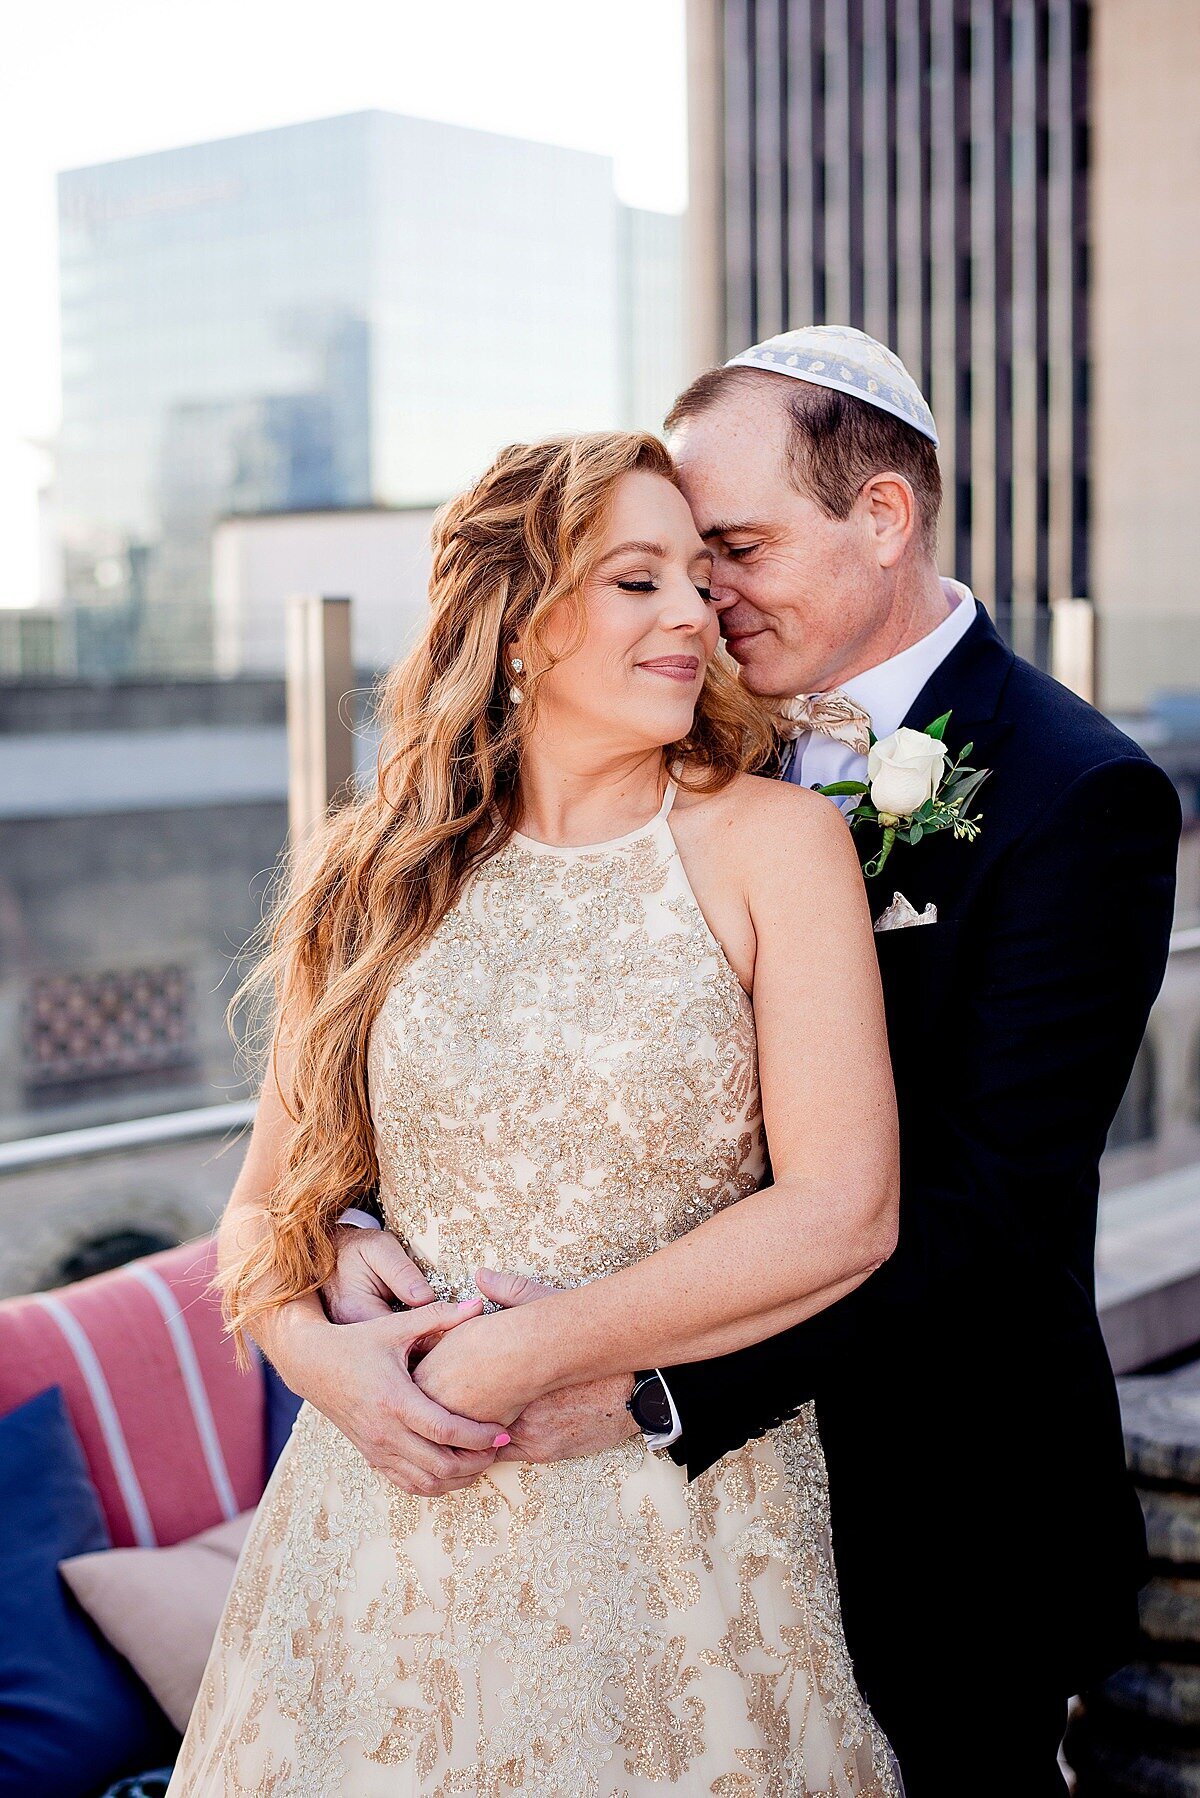 Jewish groom wearing a blakc tuxedo and white kippot and Jewish Bride wearing a gold halter top beaded wedding dress embrace on a Nashville Rooftop at Noelle Hotel at their Jewish Wedding